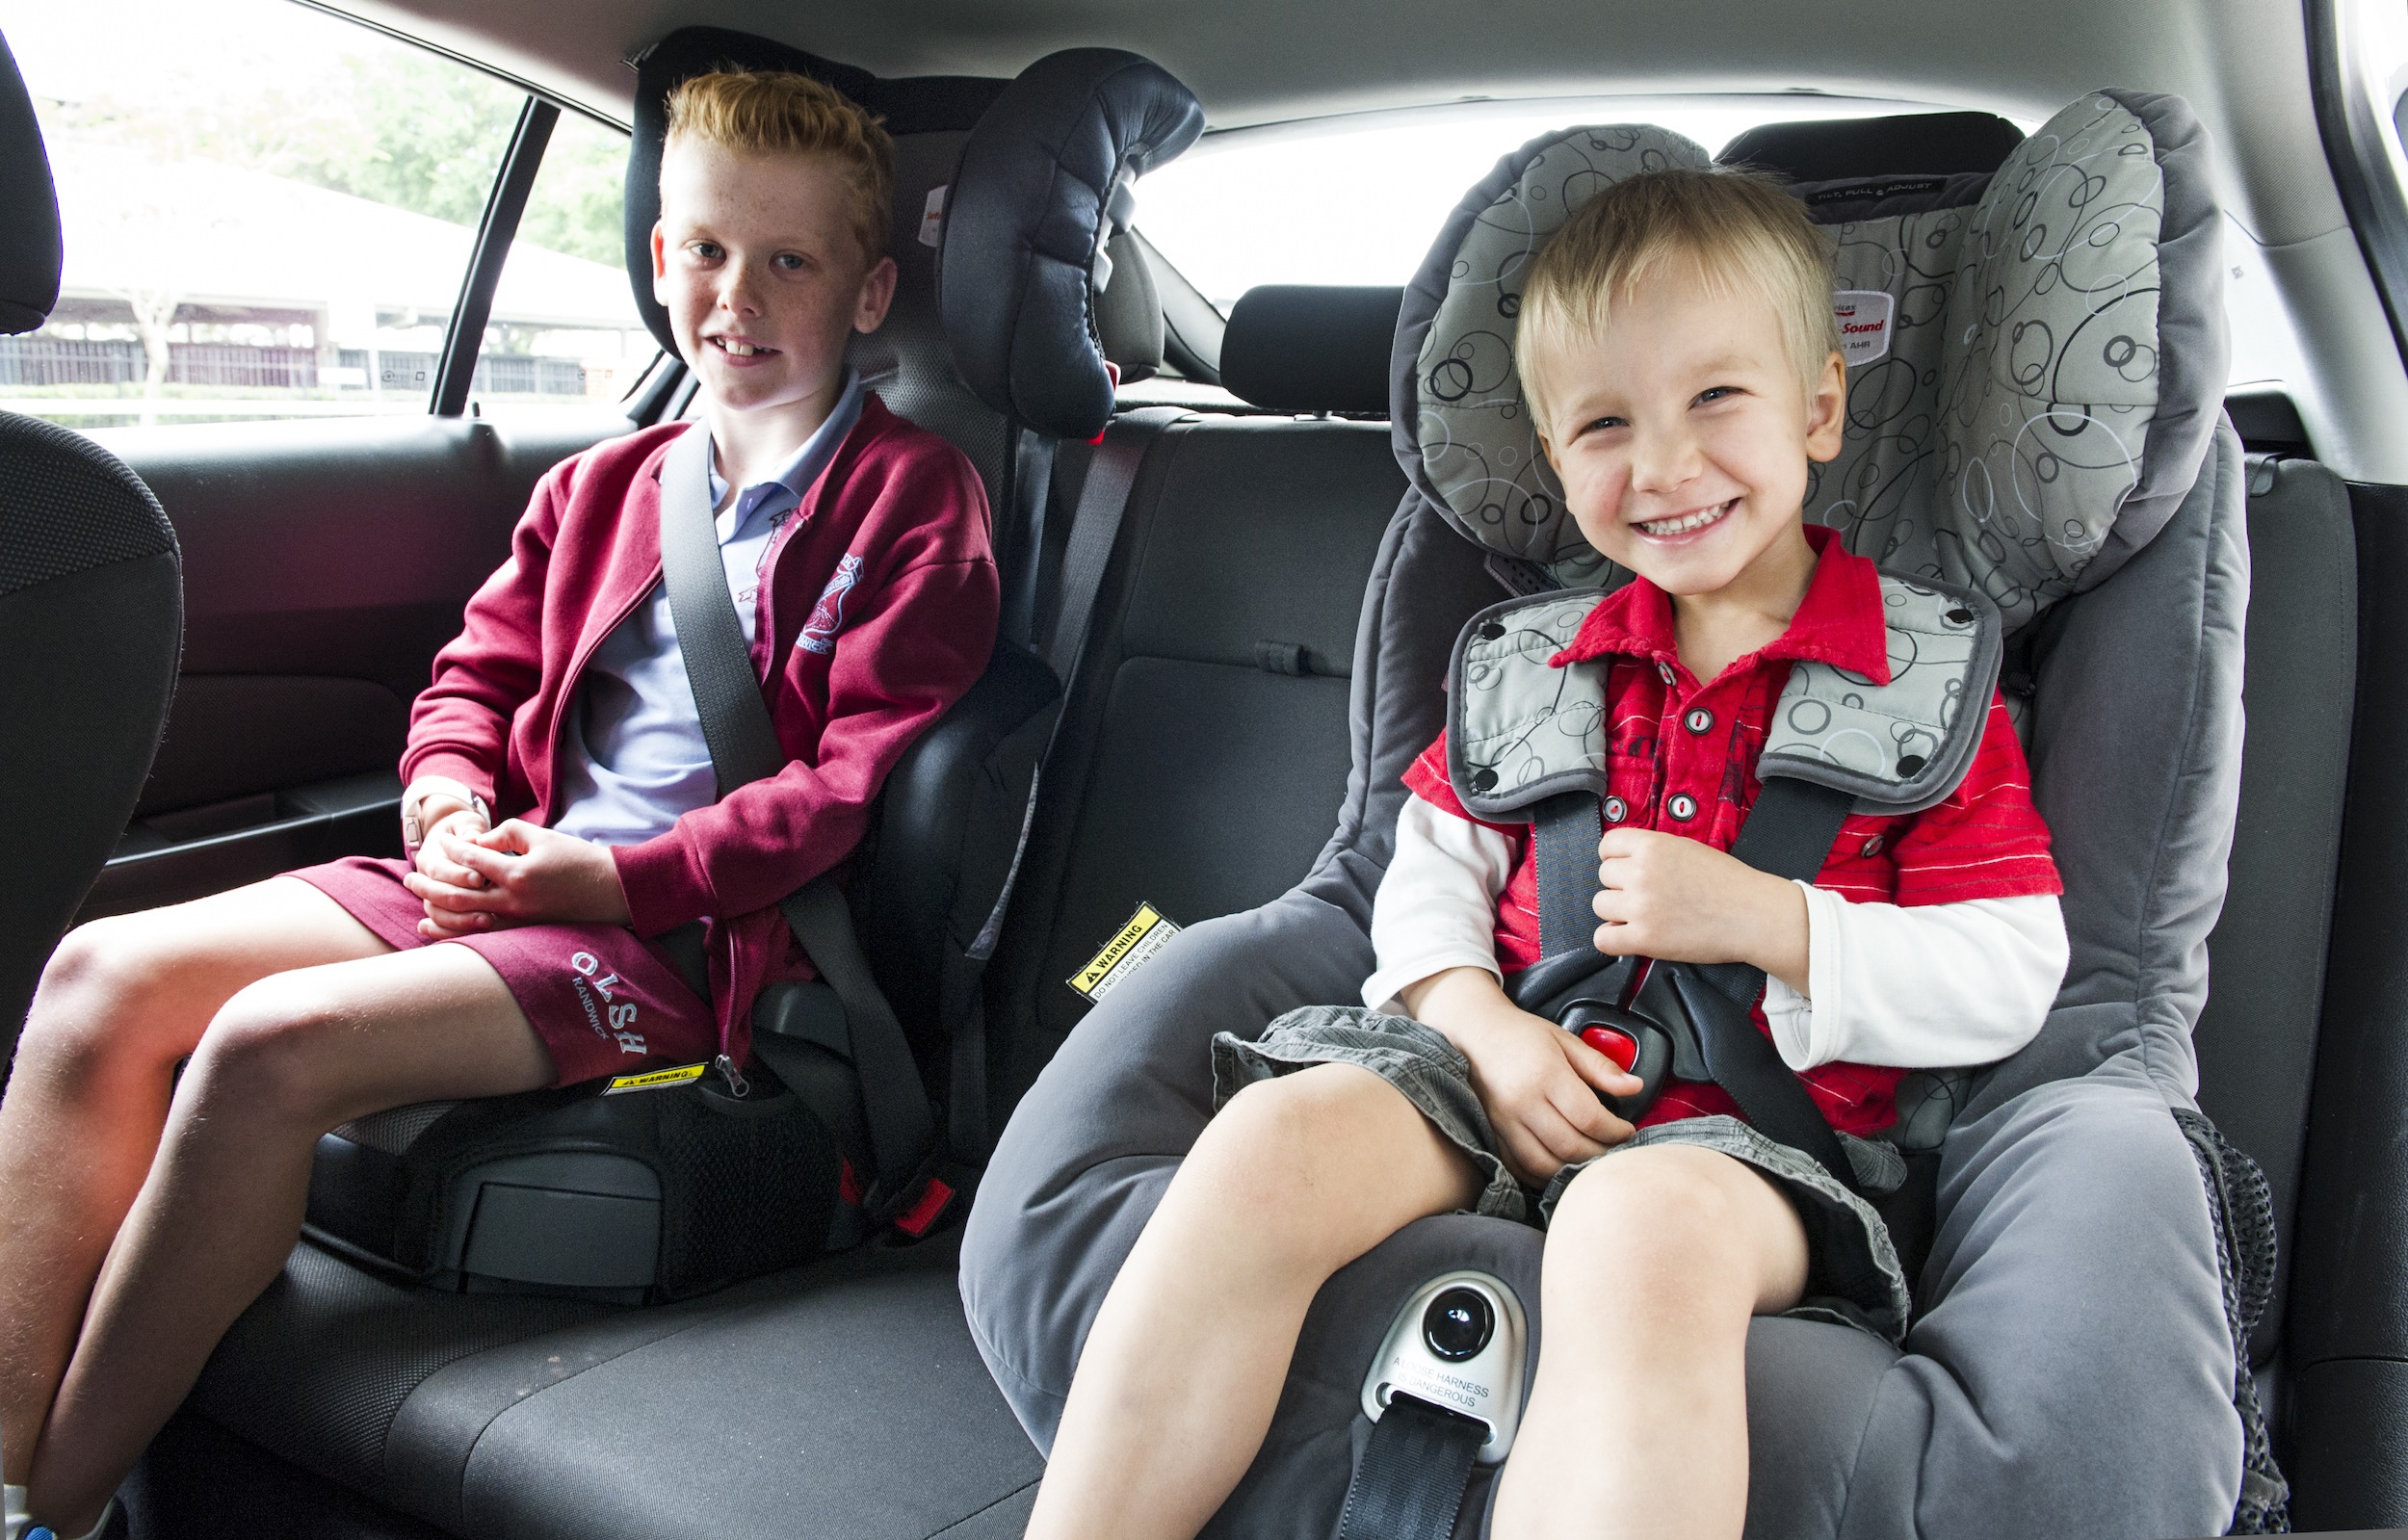 The new national guidelines advise parents not to move their children to the next type of child restraint before the child is tall enough.